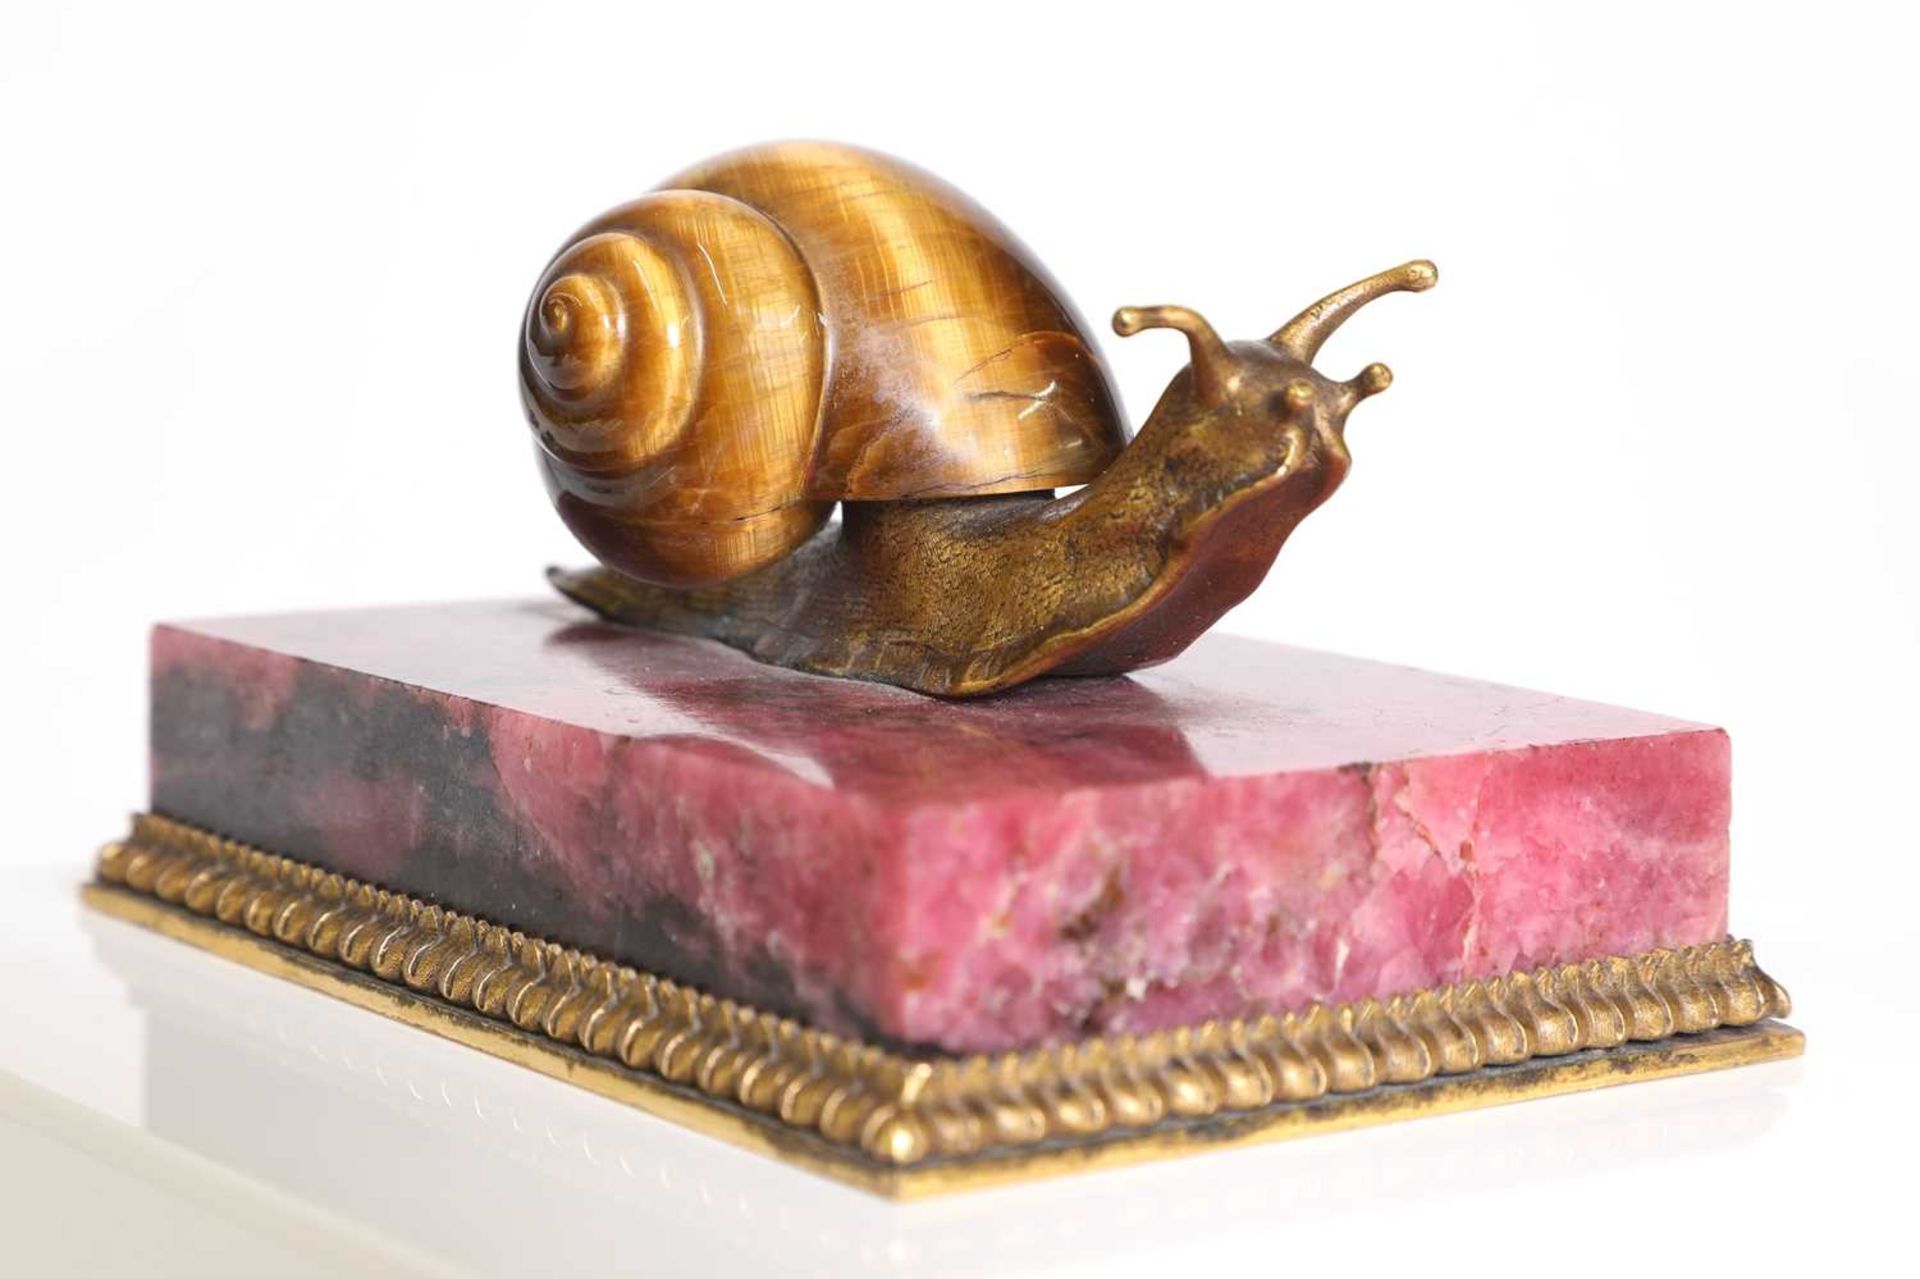 A tiger's eye and ormolu snail, - Image 7 of 25